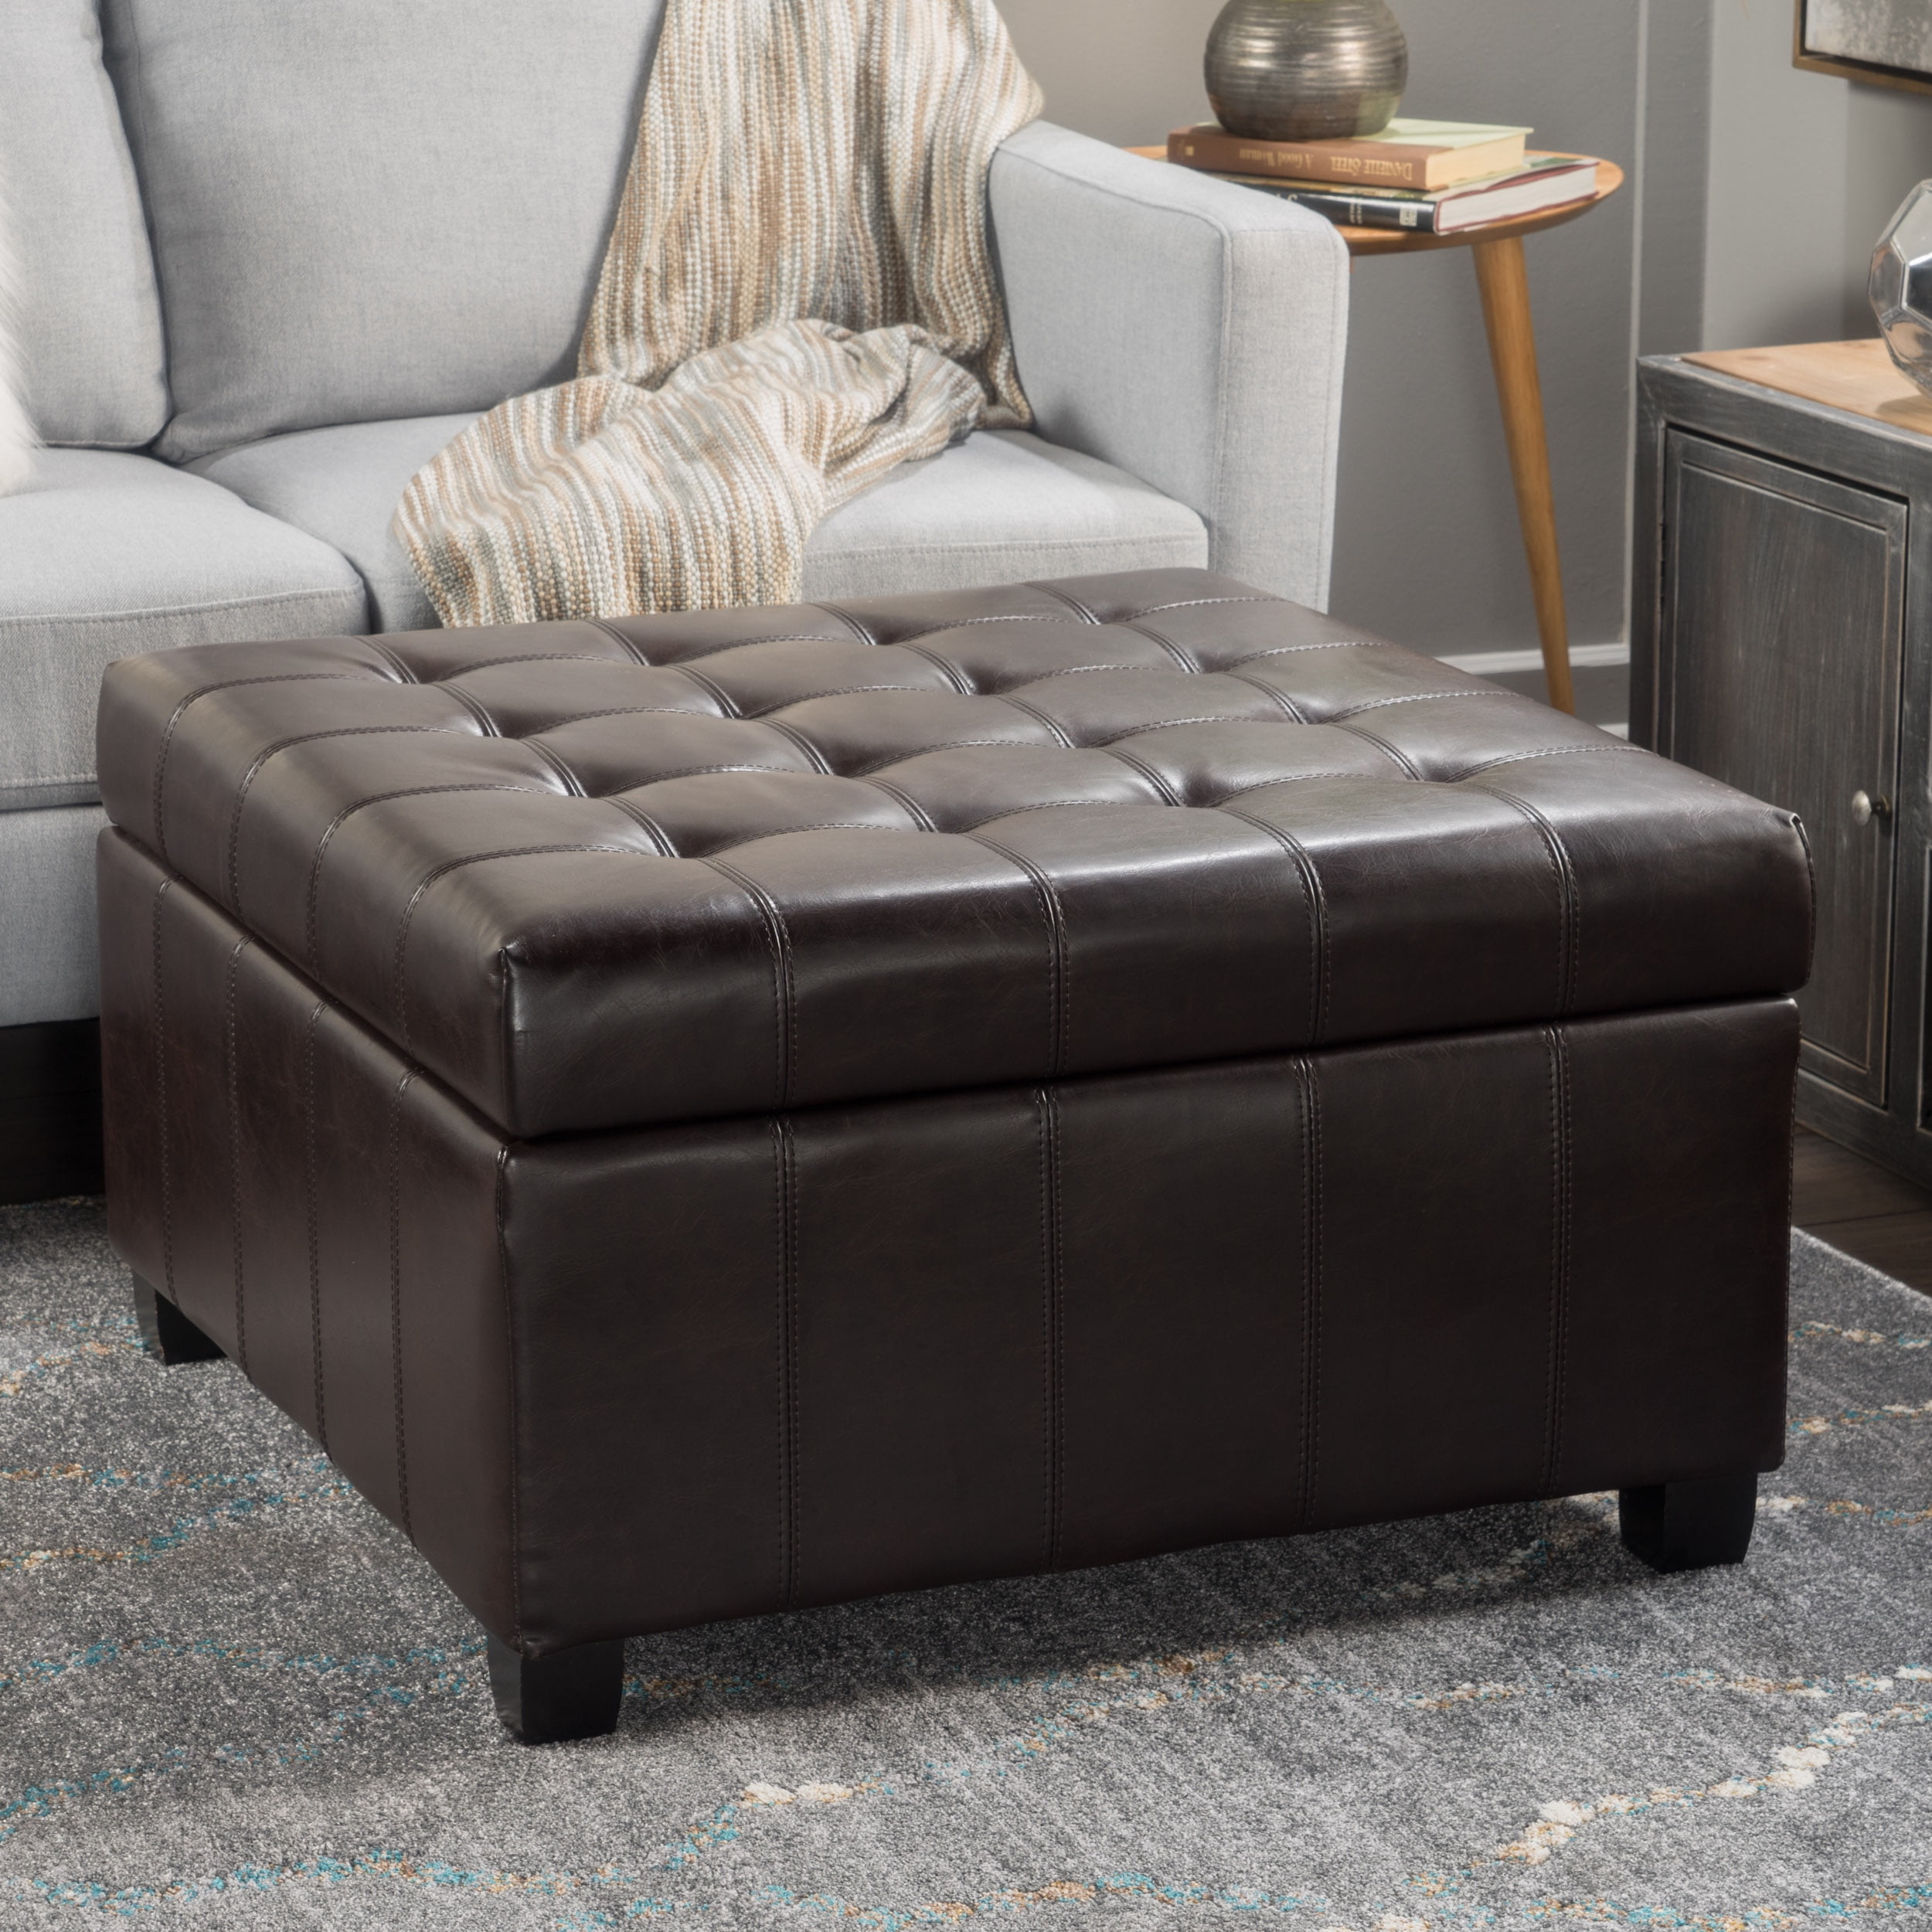 Alondra Tufted Bonded Leather Storage, Rothwell Contemporary Tufted Bonded Leather Storage Ottoman Bench Brown